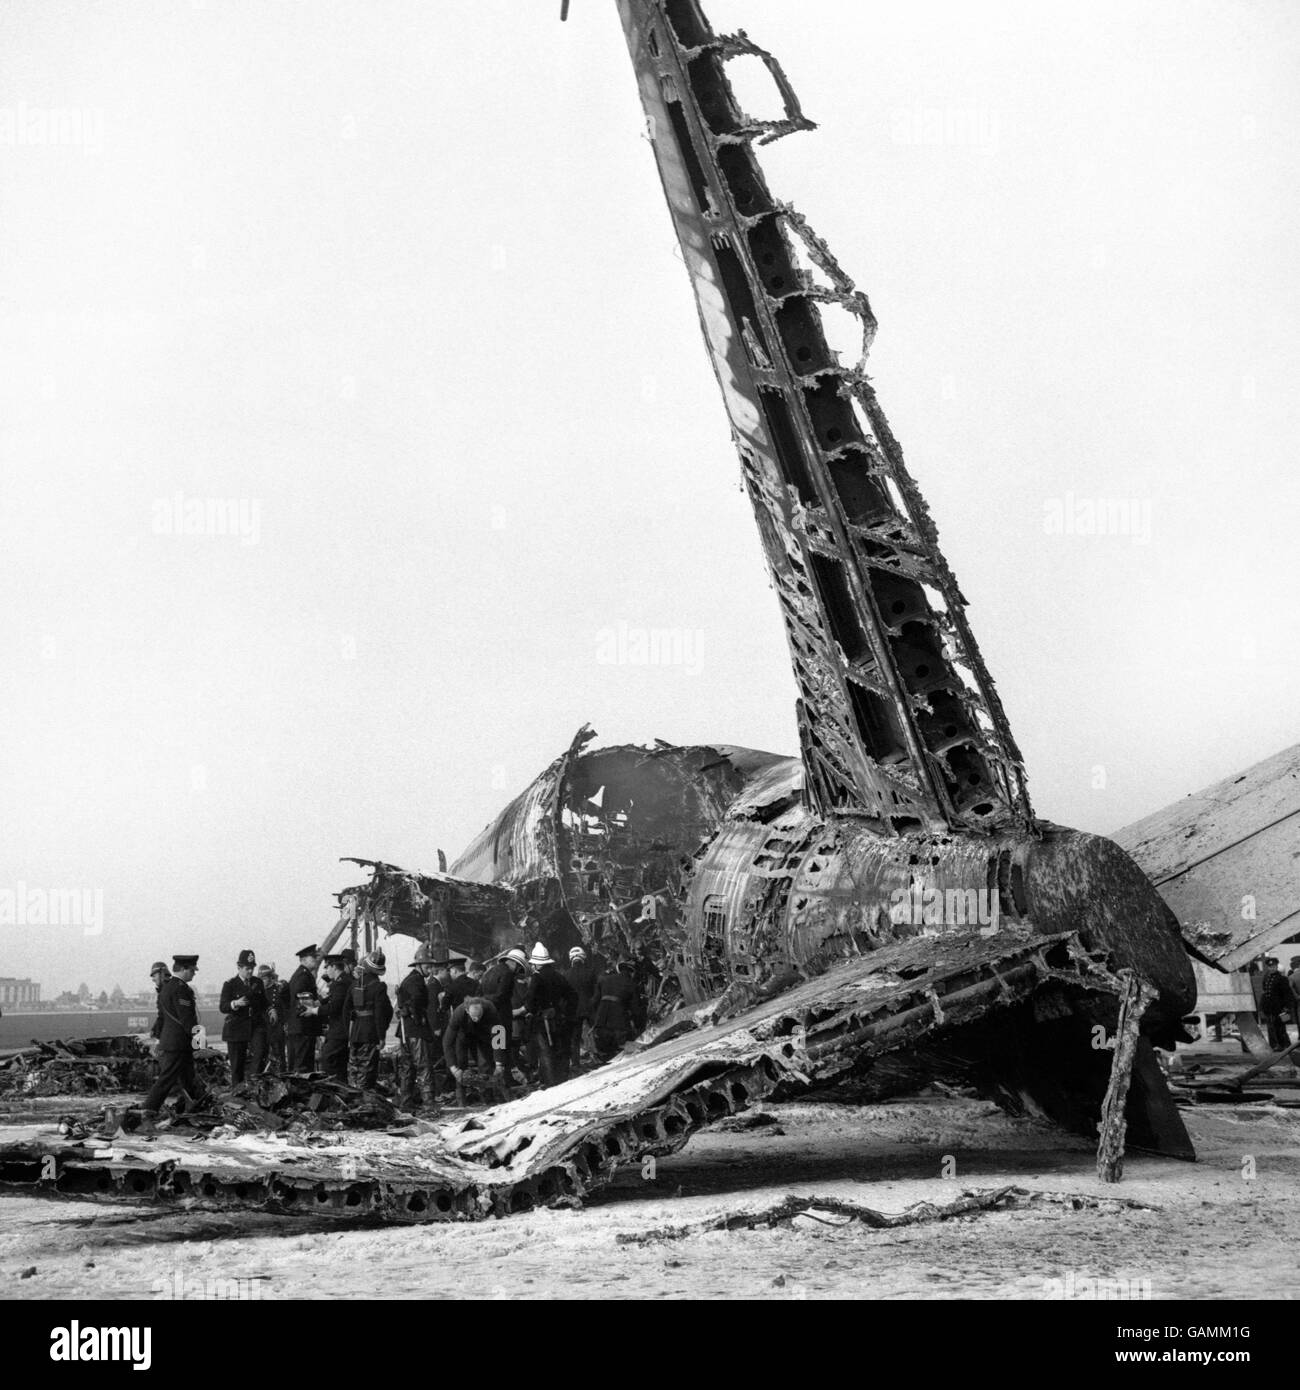 The skeleton of the tail rears from the blackened wreck of the Australia bound Boeing 707 jetliner of BOAC Flight 712 which crashed in flames at Heathrow Airport, only 4 minutes after take-off. Of the 127 people on board, 122 were known to have survived. There were 5 dead, including Barbara Jane Harrison, a flight attendant, who was awarded the George Cross for heroism. Stock Photo